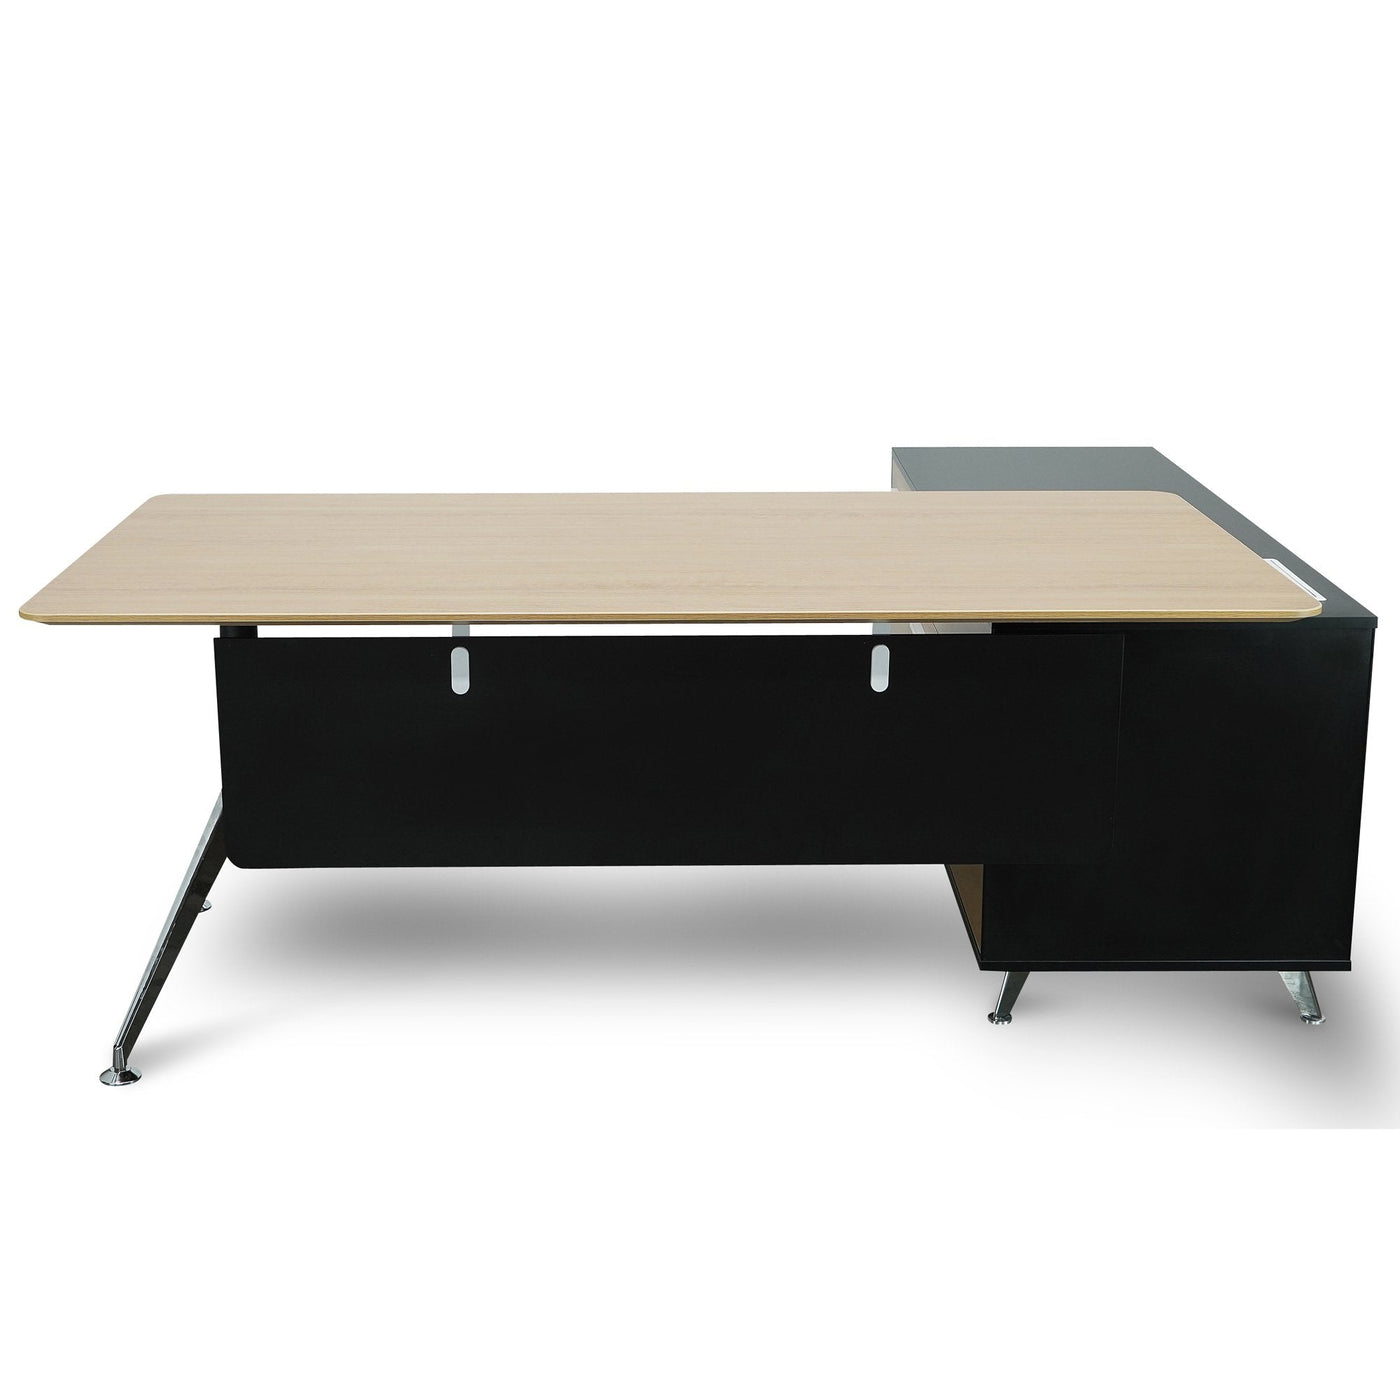 1.95m Executive Desk Left Return - Black Frame with Natural Top and Drawers